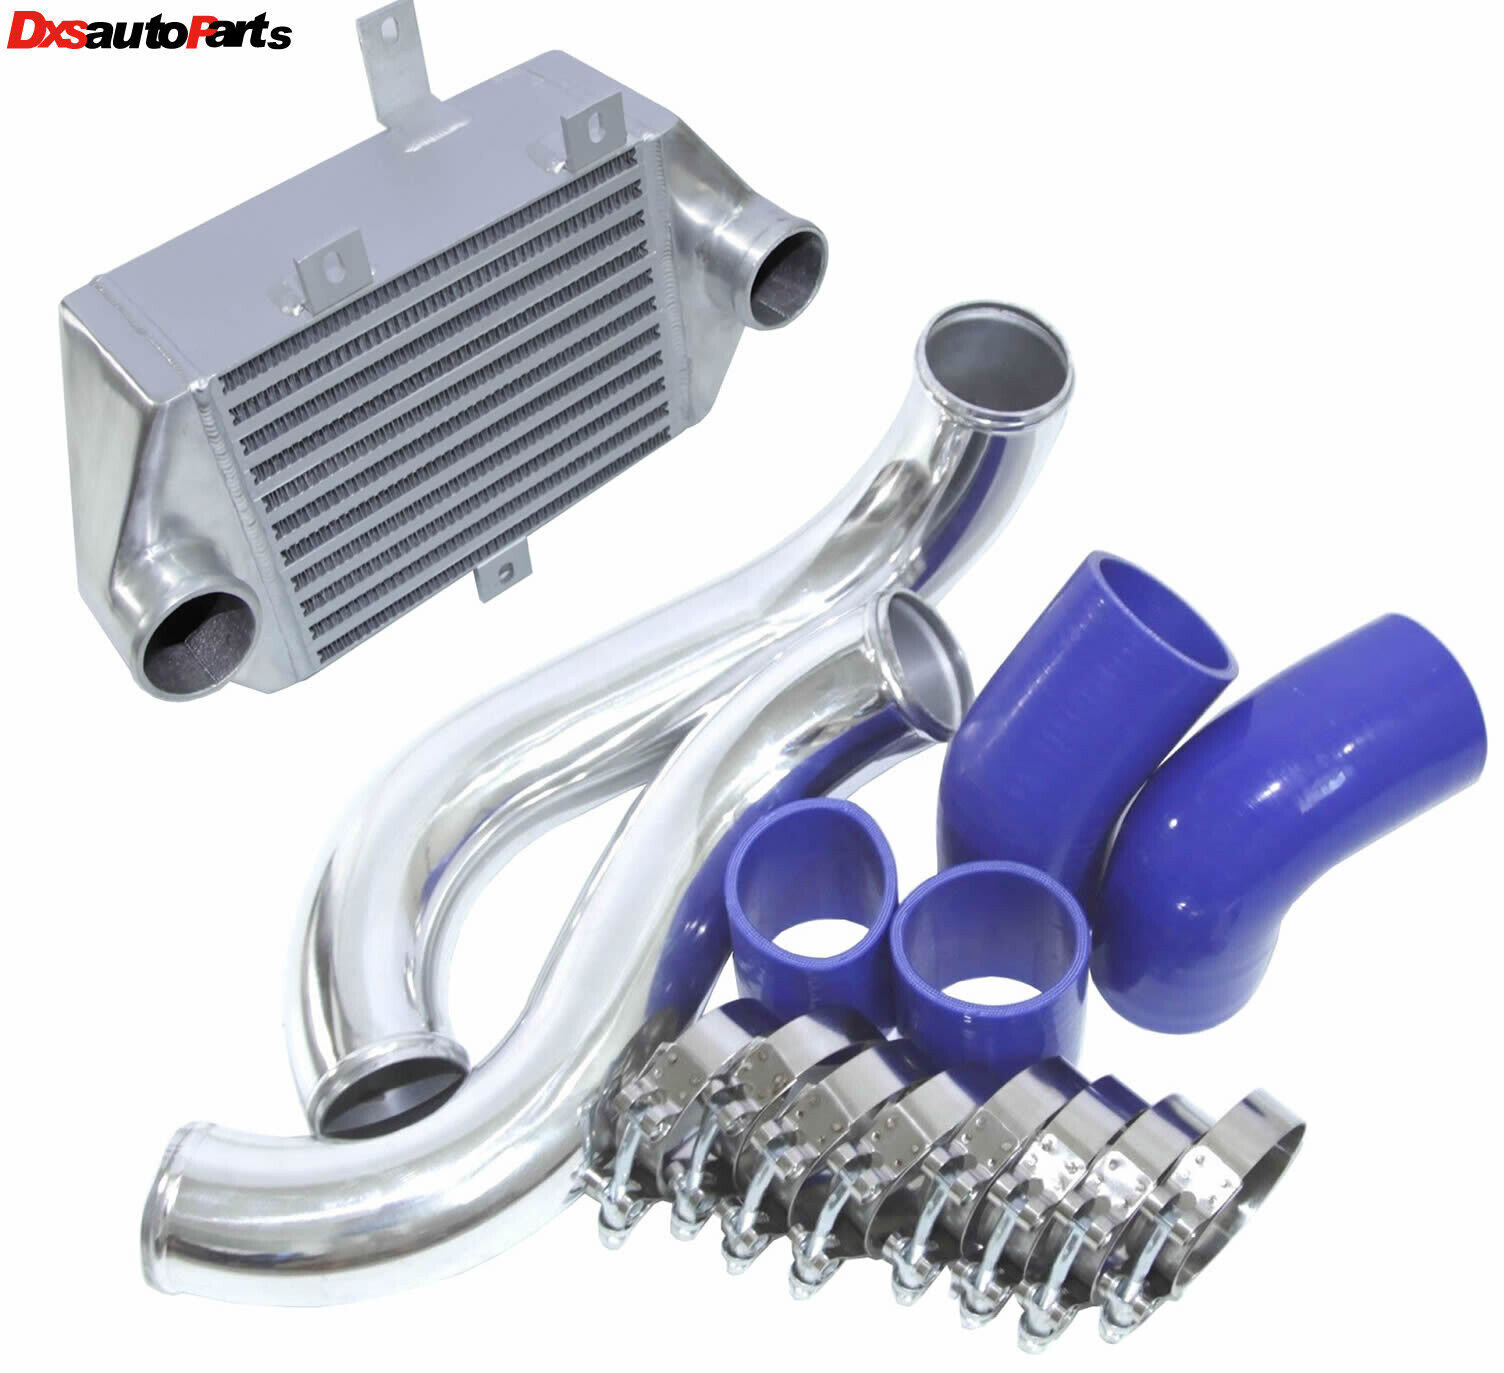 91 - 95 MR2 Side Mount Intercooler Kit 3SGTE 3S-GTE 2.0 DOHC SW20 Tube and Fin